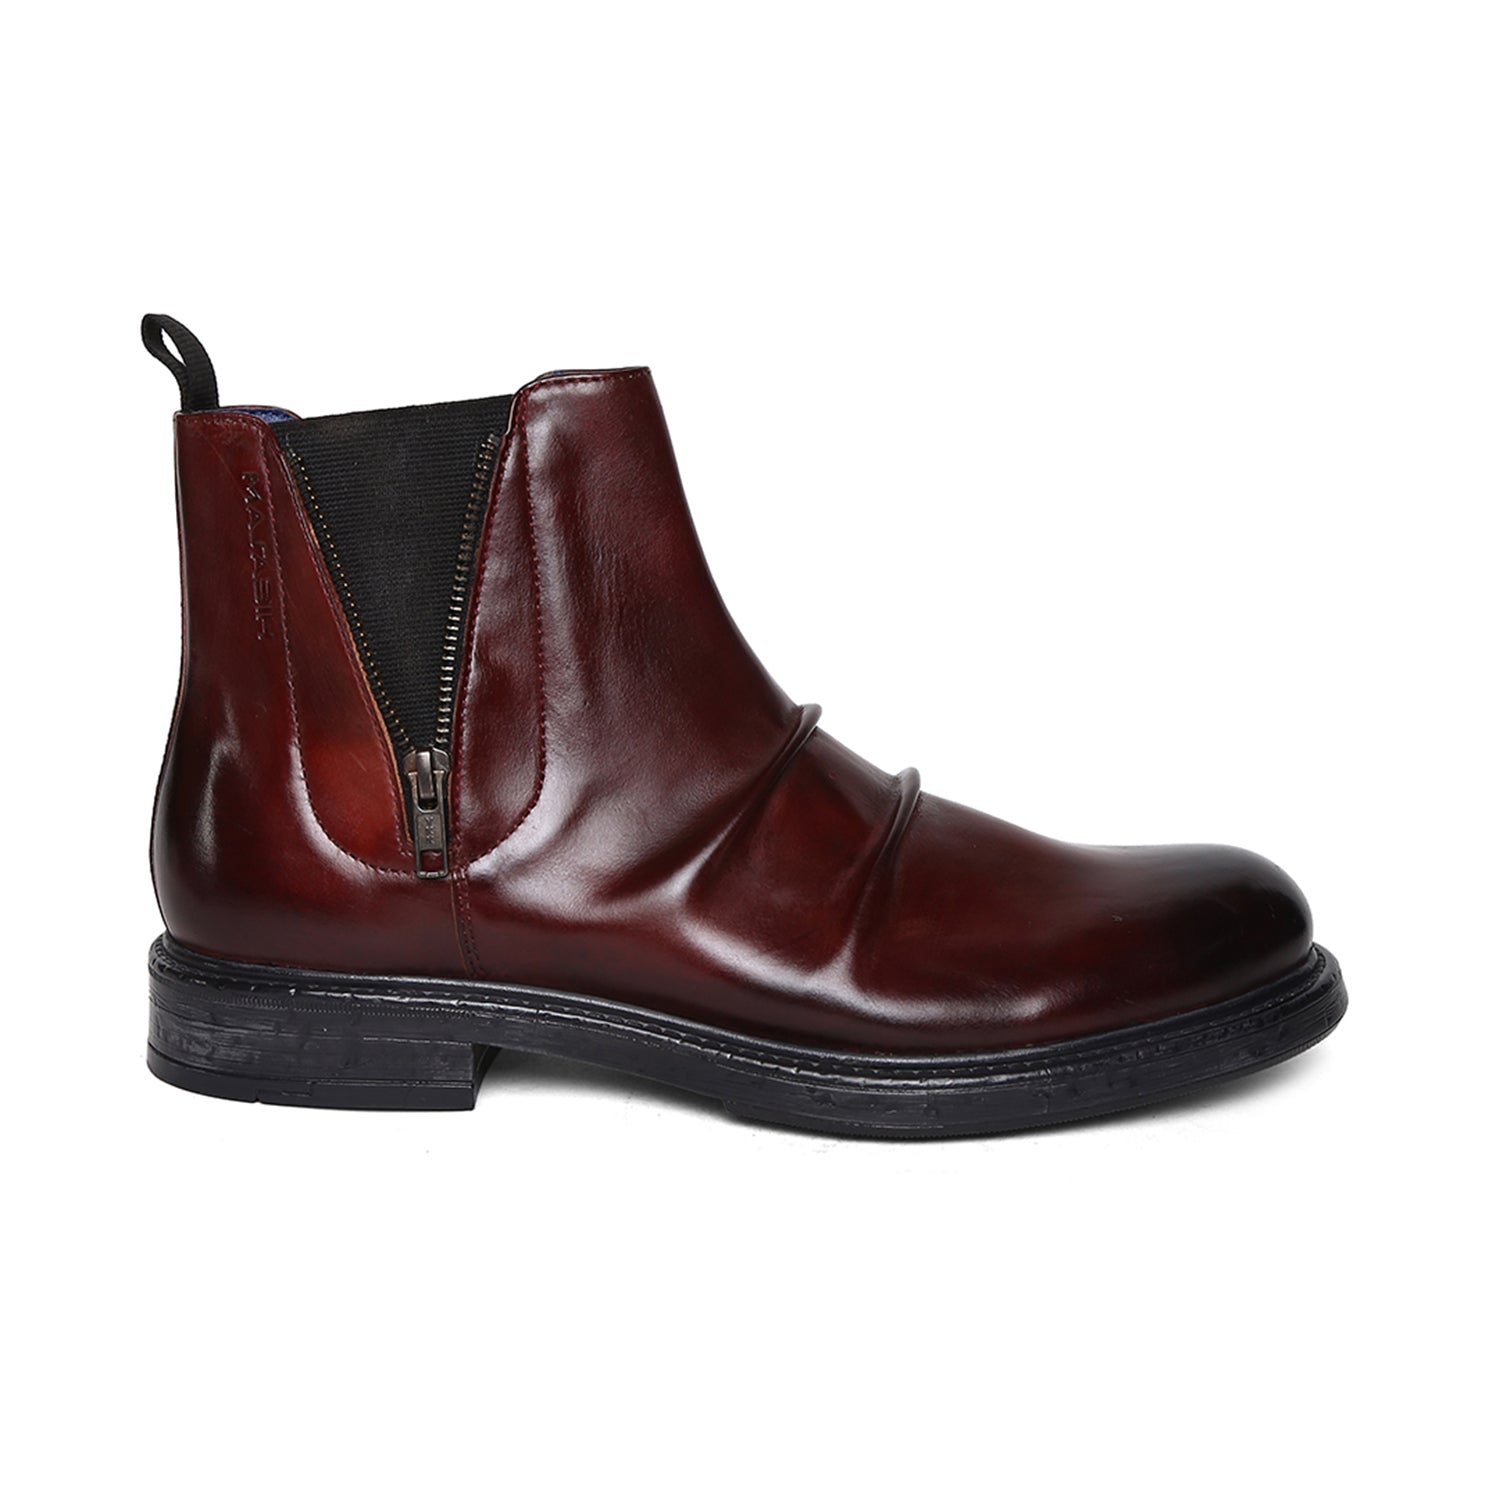 Masabih Genuine Leather Burgundy Casual Chelsea Boots with Zipper for Men